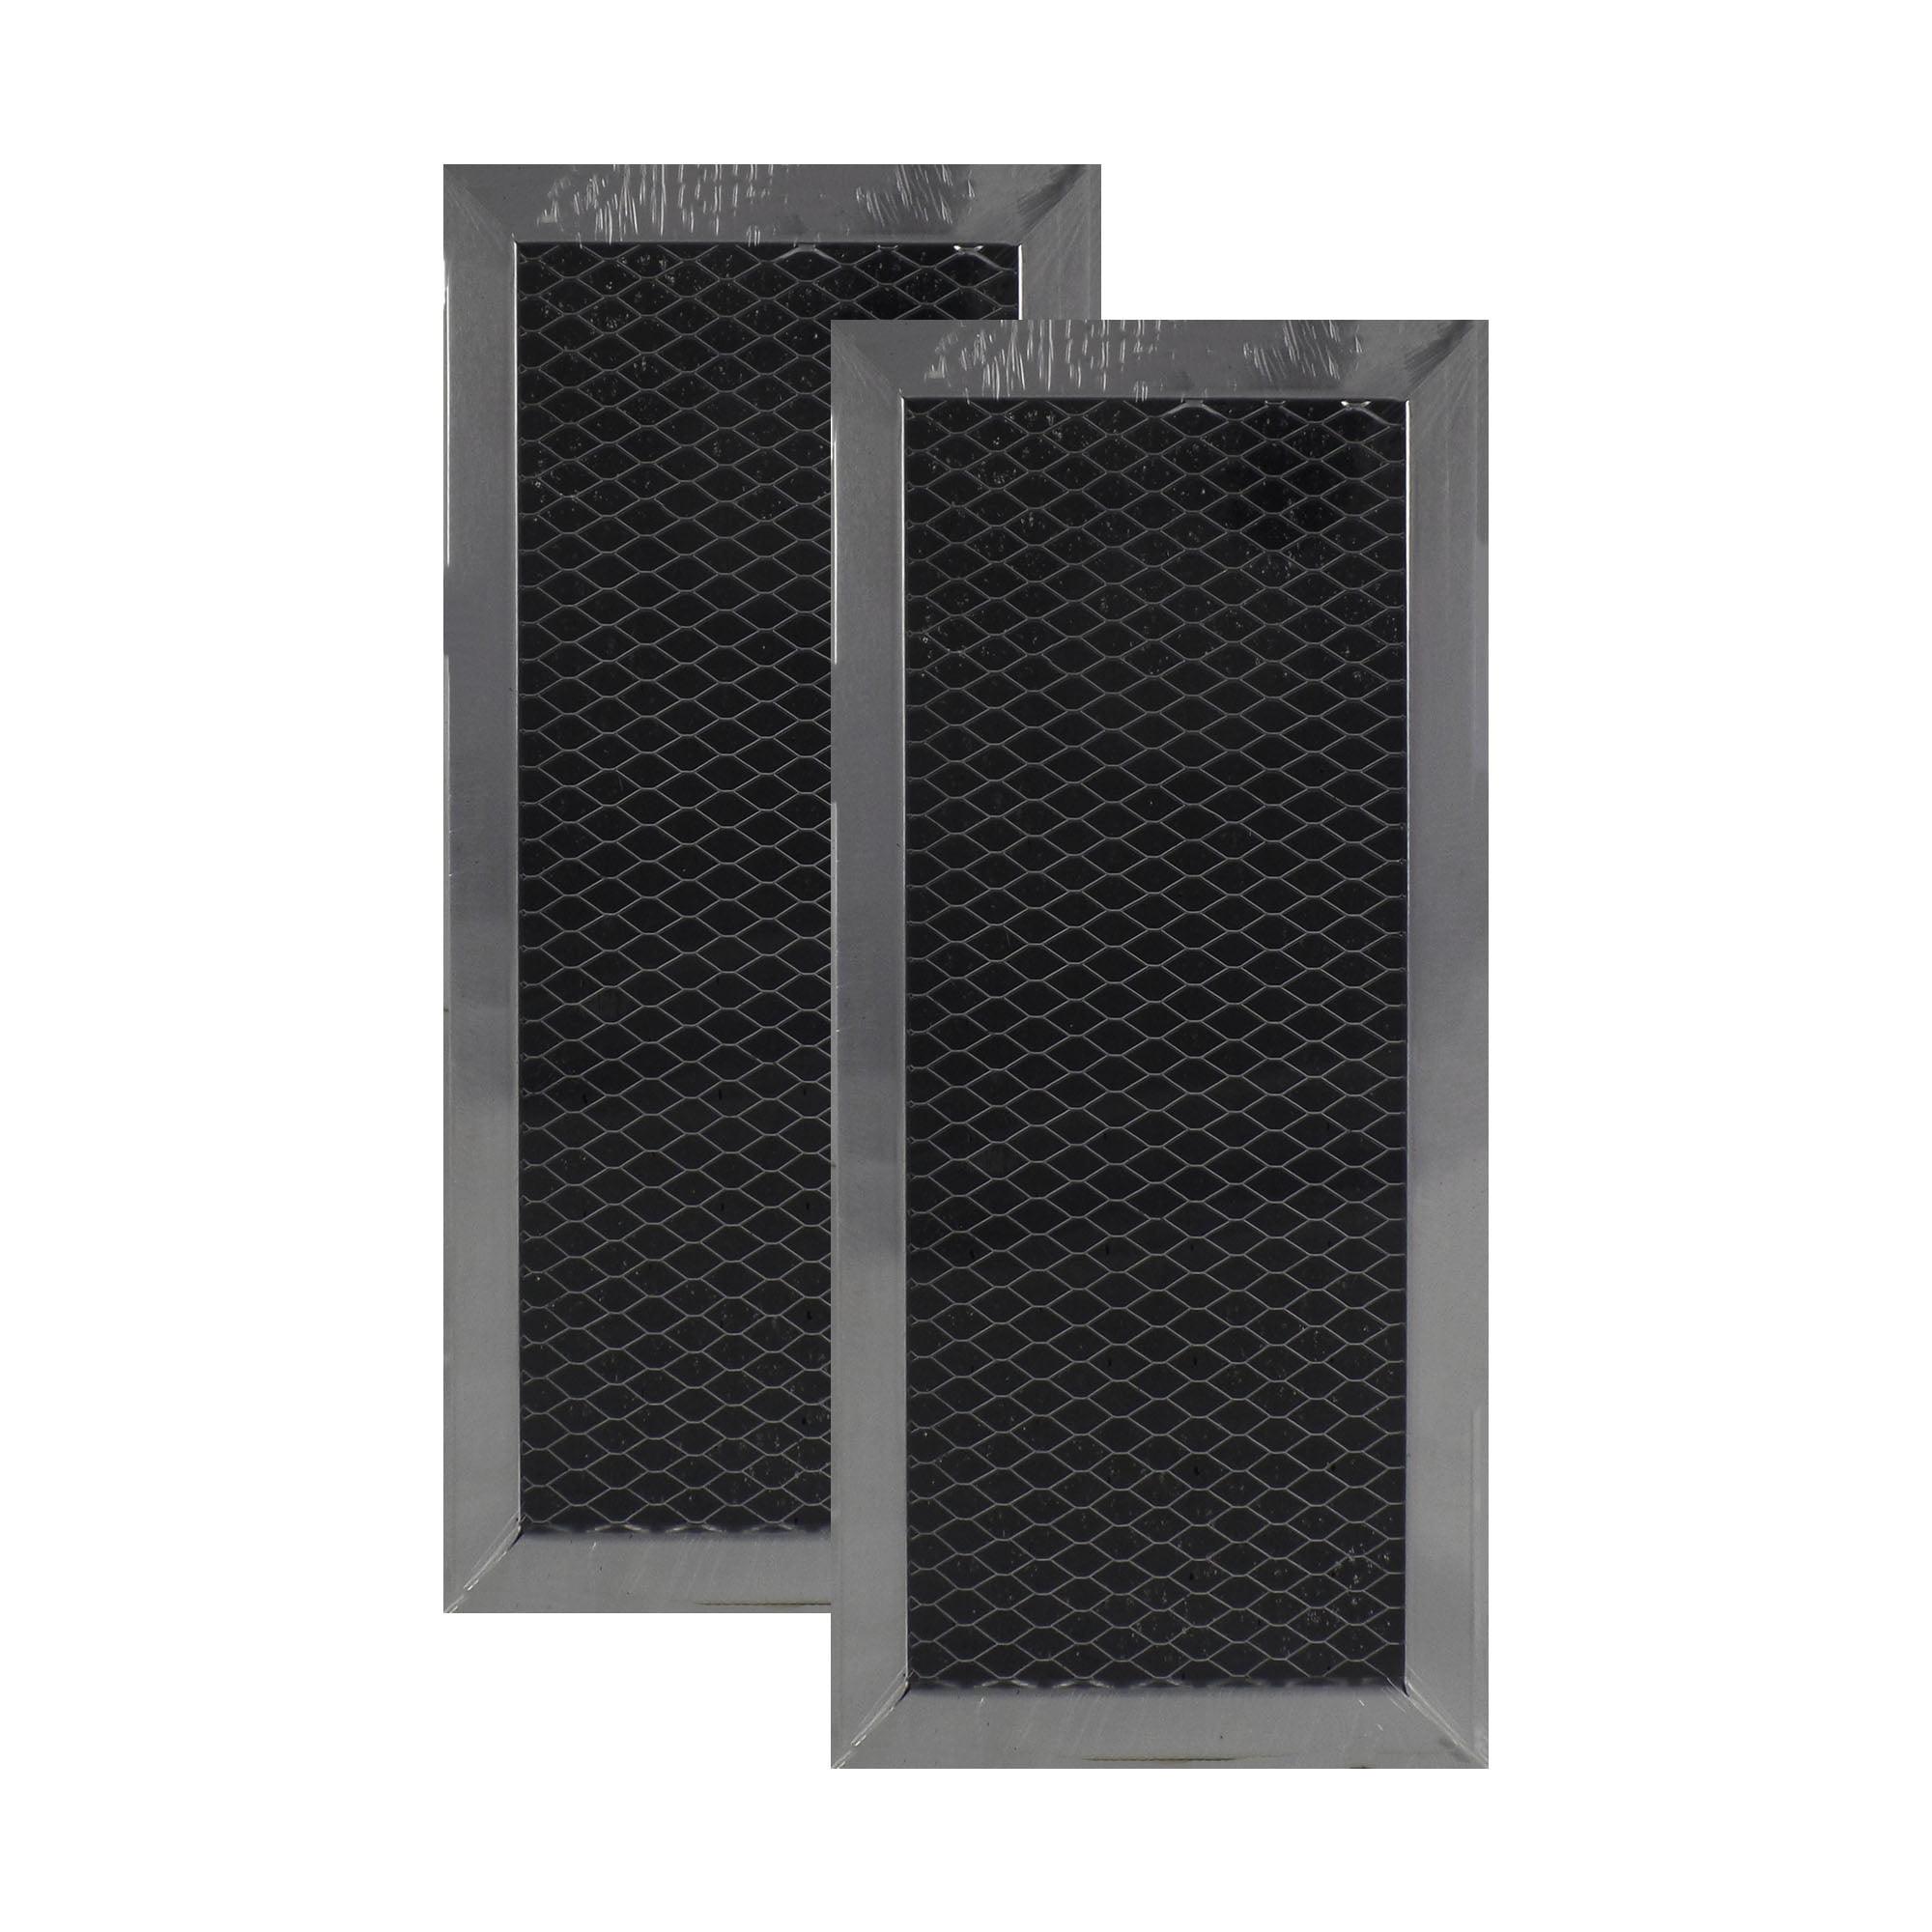 2  Filters DE63-00367D Charcoal Filter for Samsung Microwave 4 x 8 9/16 x 3/8" 